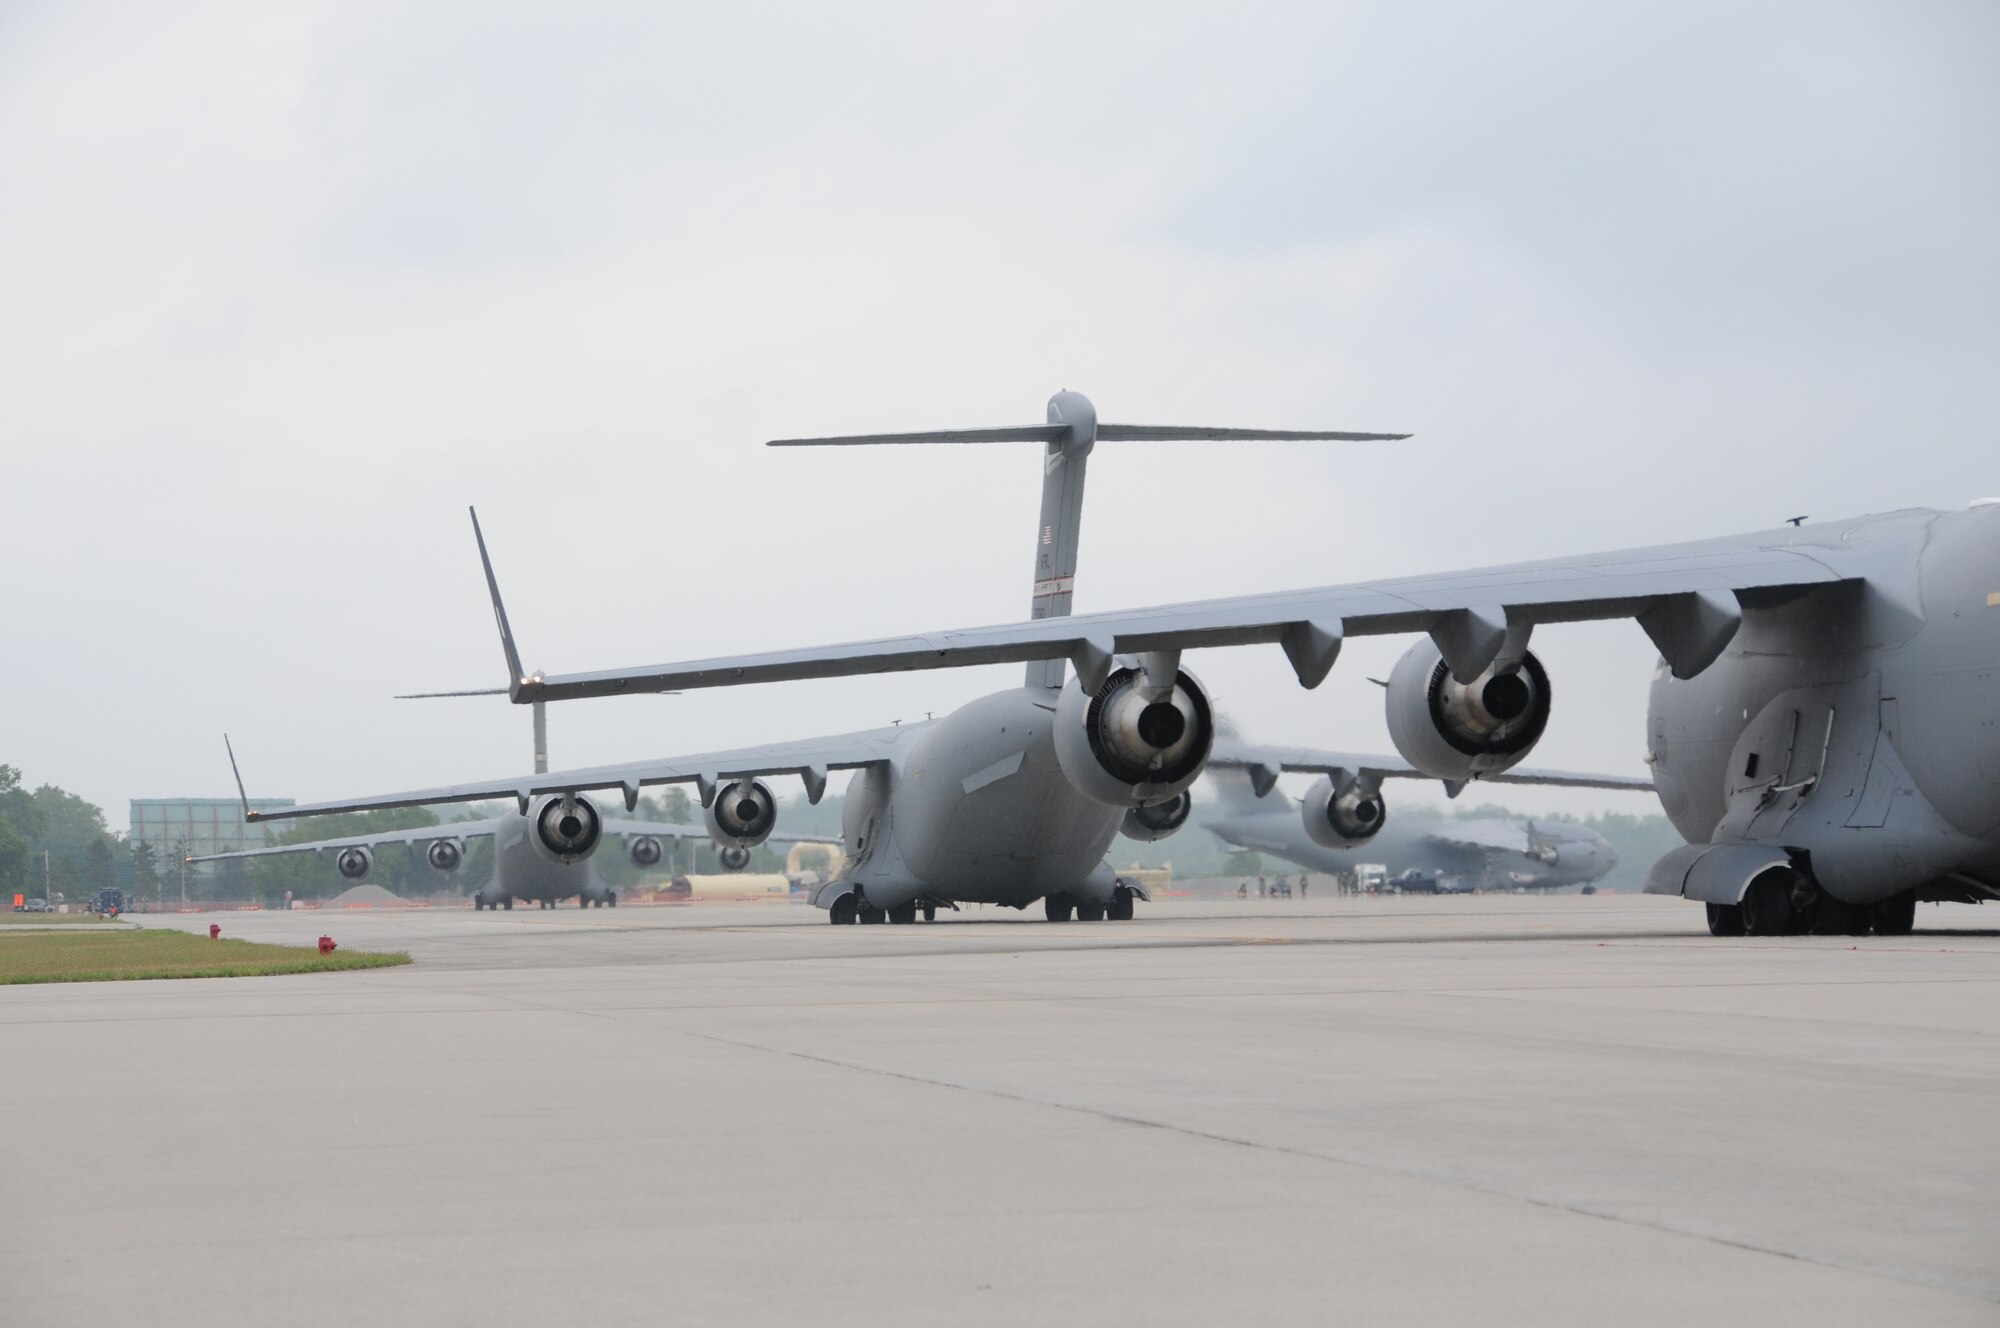 WRIGHT-PATTERSON AIR FORCE BASE, Ohio - Four C-17 Globemaster III aircraft prepare to depart Wright-Patterson Air Force Base, Ohio, as part of a 445th Airlift Wing training exercise July 14. The exercise was held to prepare aircrews and maintenance personnel for its upcoming operational readiness inspection.
(U.S. Air Force photo/Tech. Sgt. Anthony Springer)
